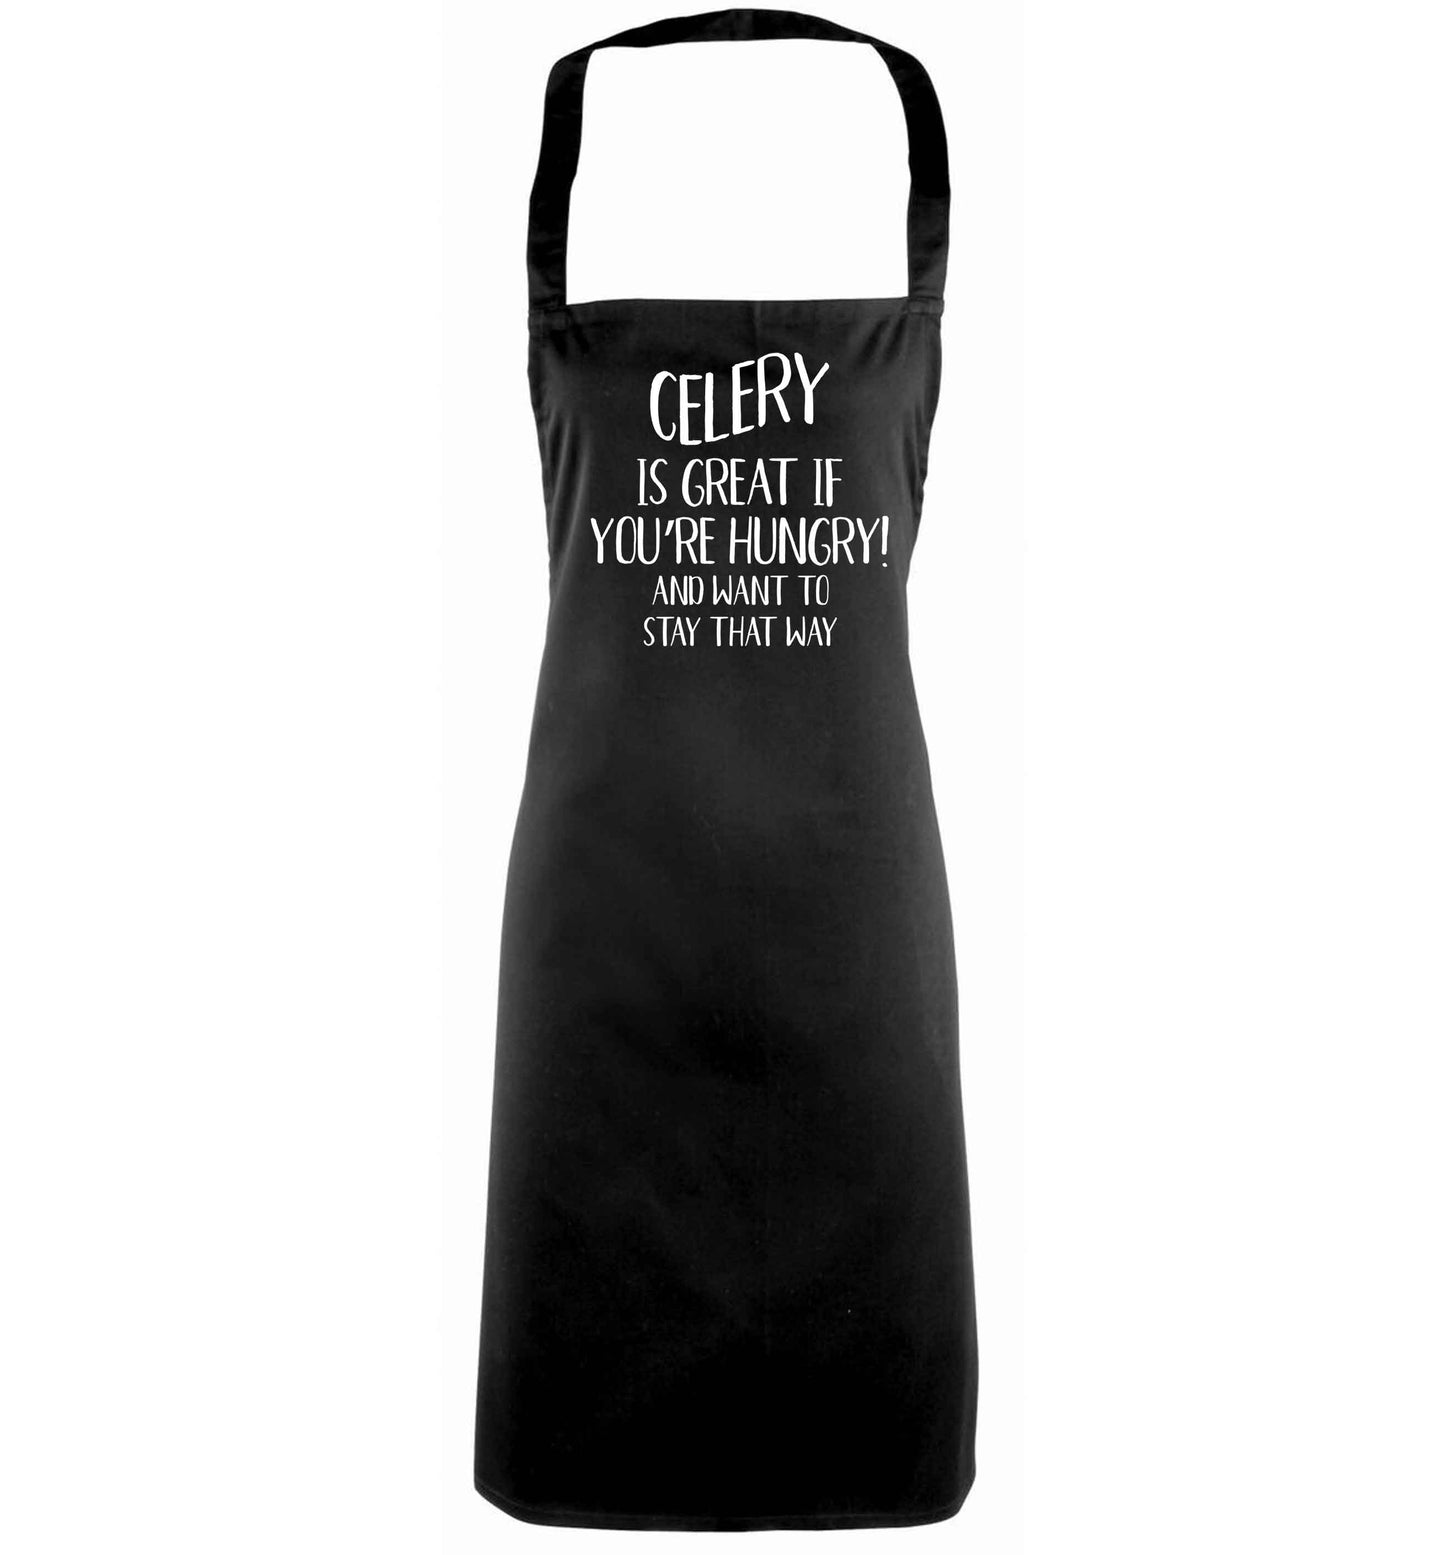 Cellery is great when you're hungry and want to stay that way black apron